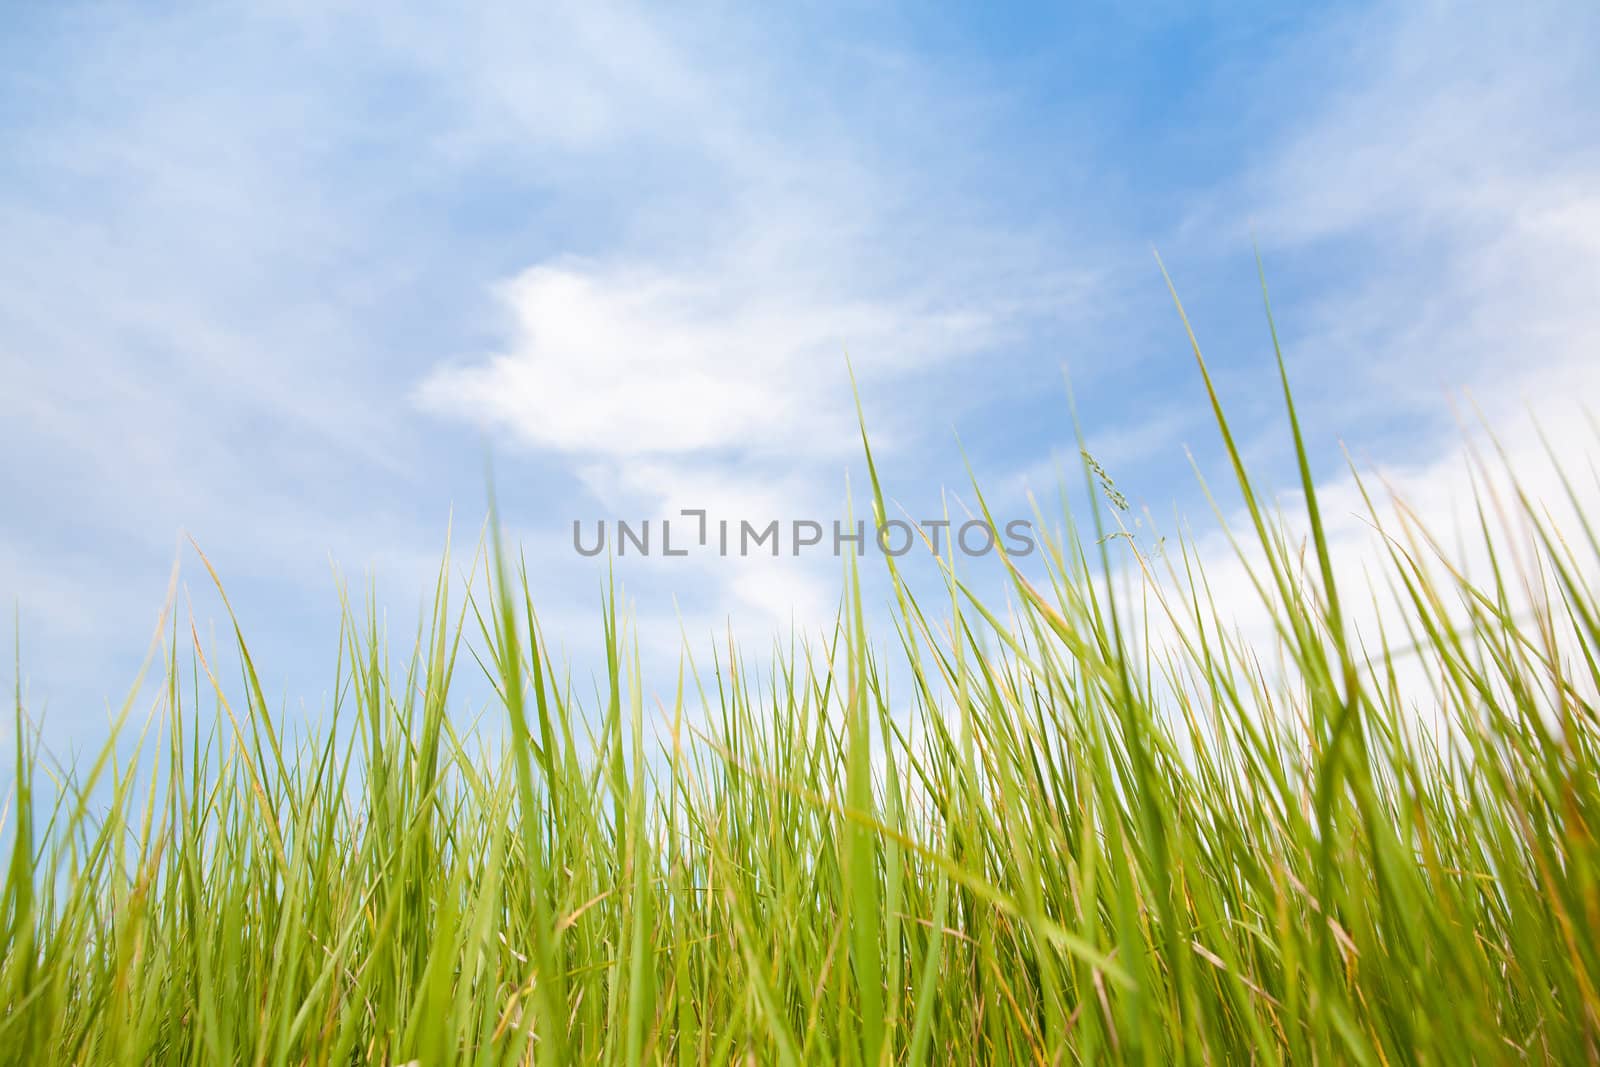 green grass and blue sky with clouds
